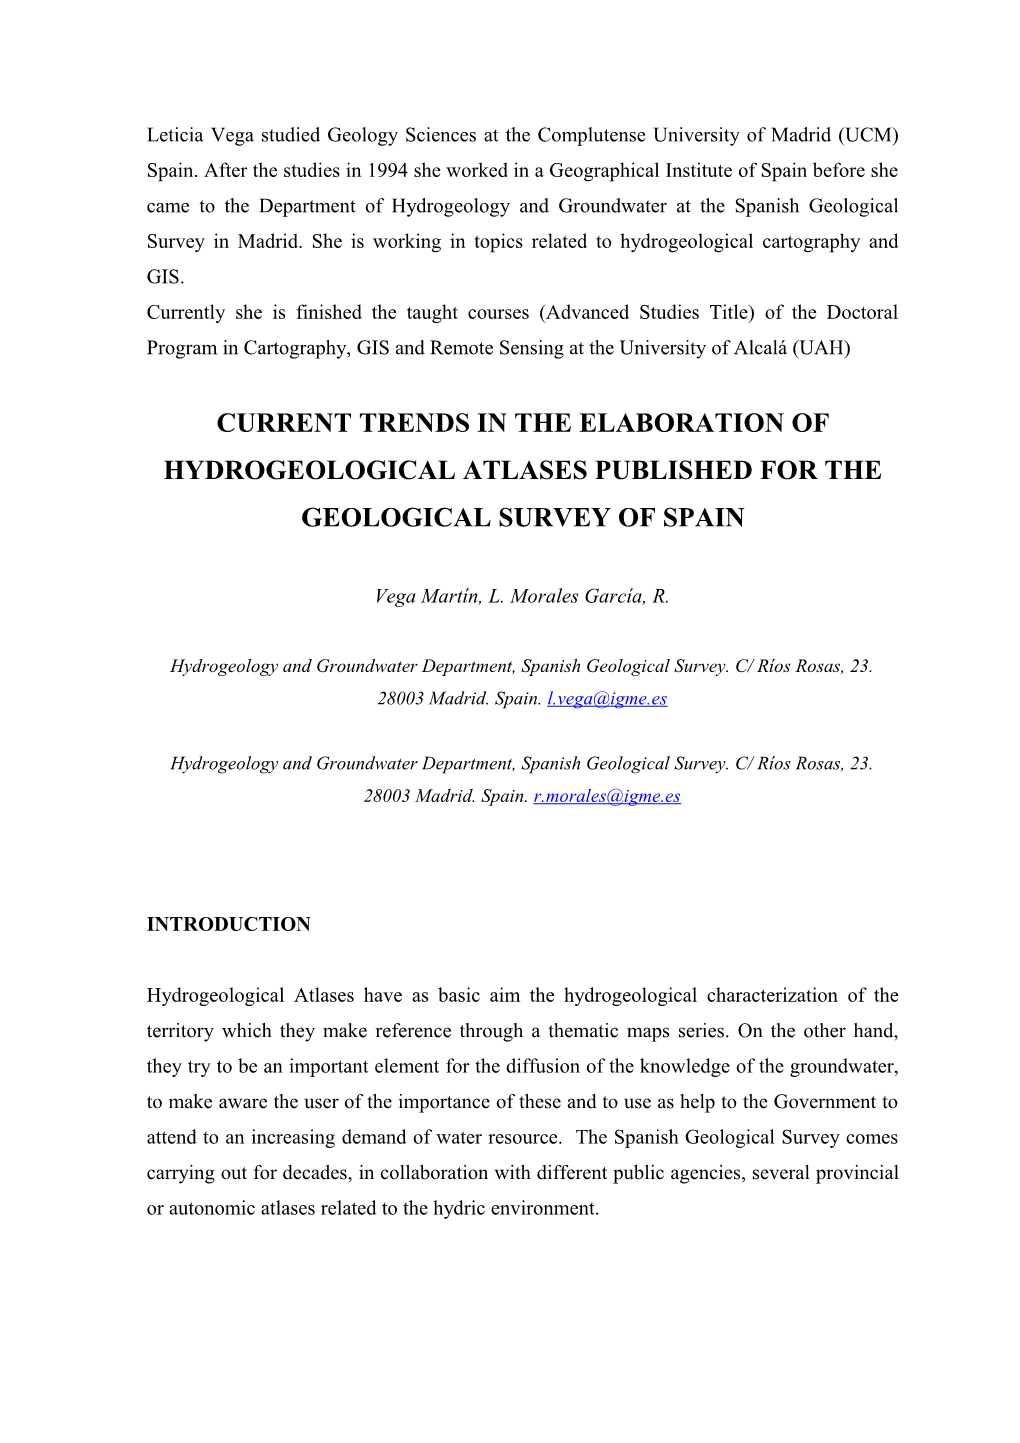 Current Trends in the Elaboration of Hydrogeological Atlases Published for the Geological